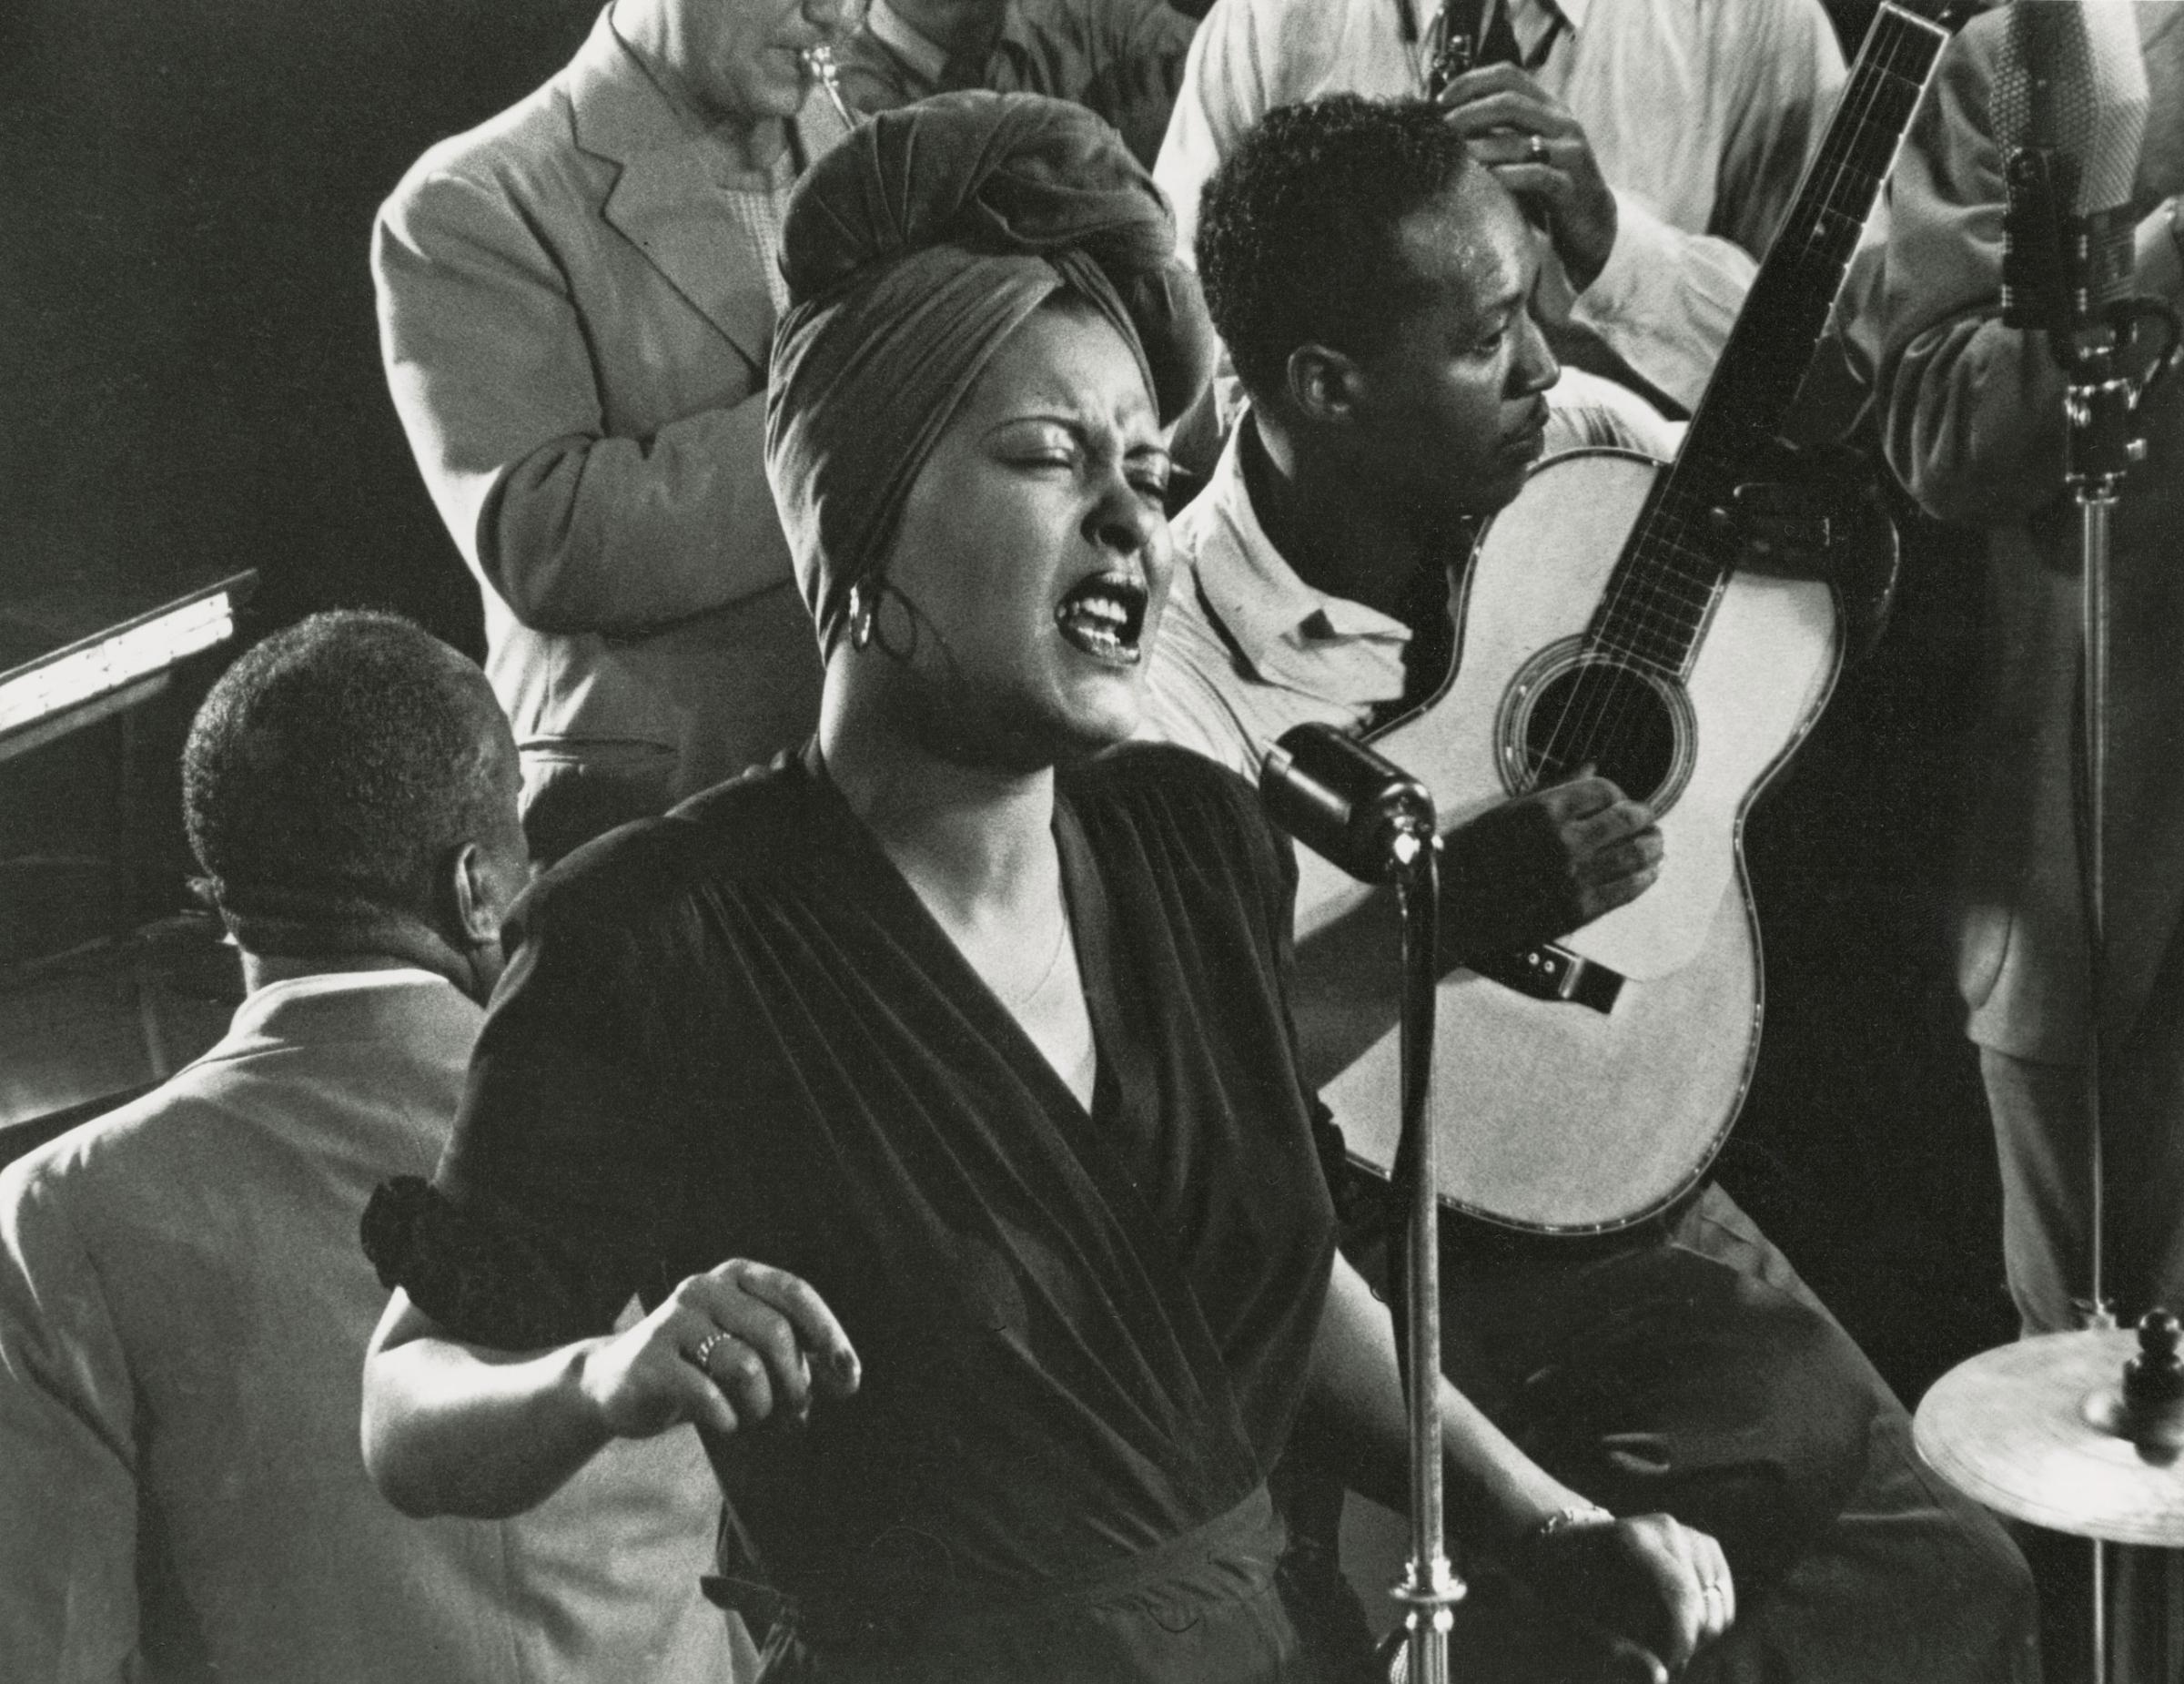 Billie Holiday singing "Fine & Mellow" accompanied by James P. Johnson at piano.